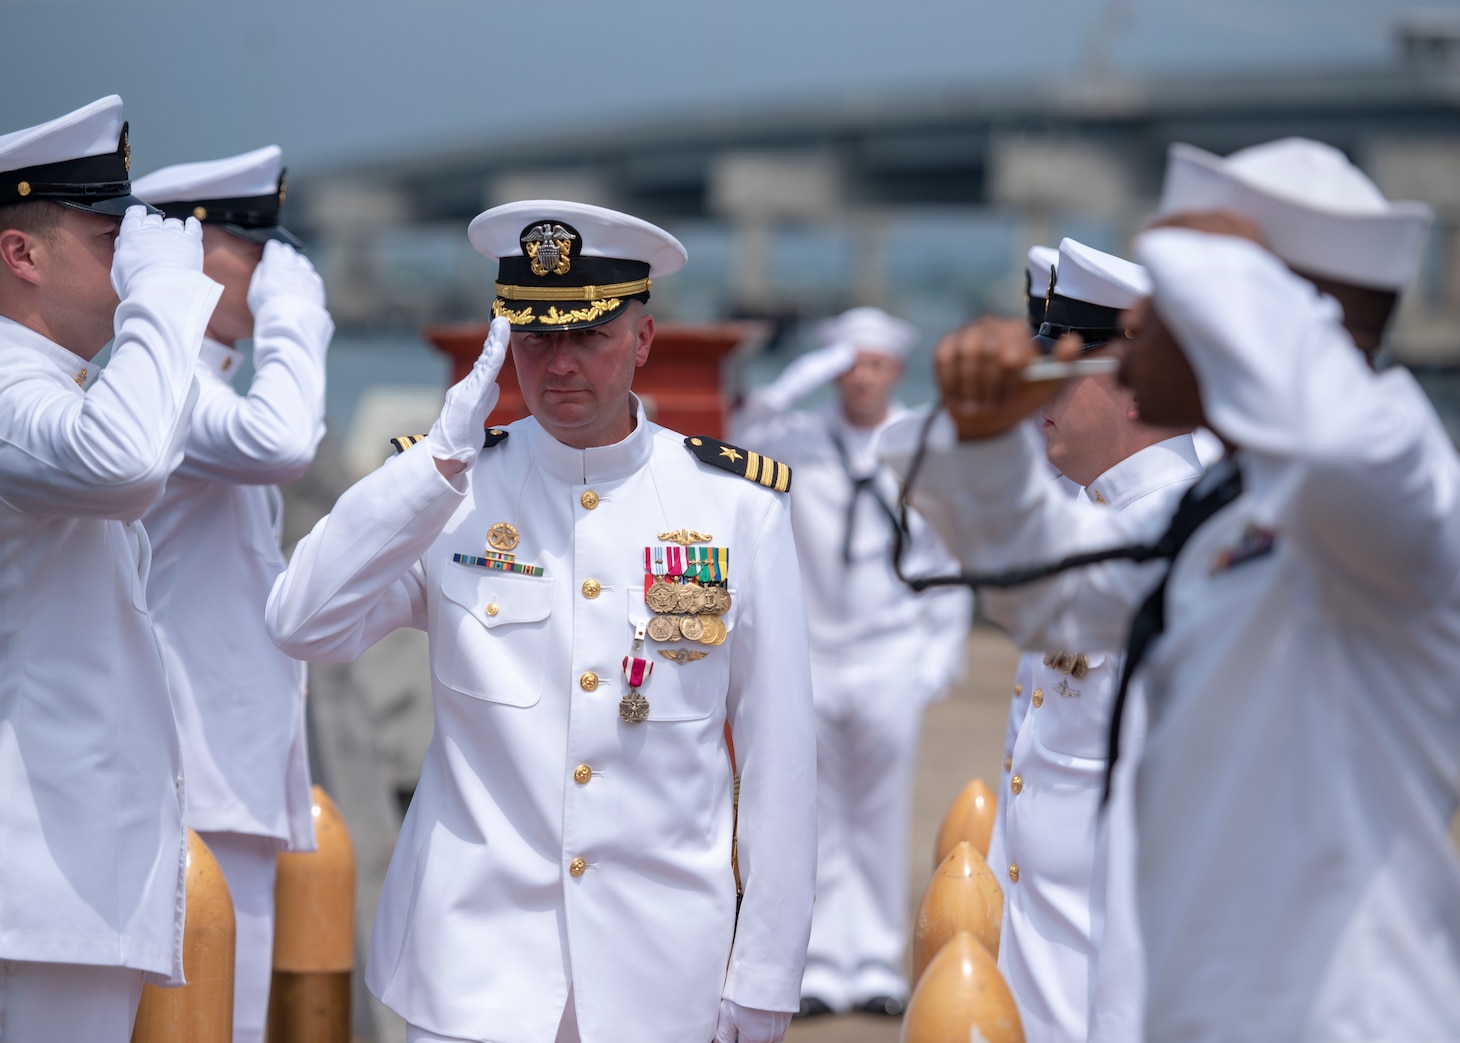 180511-N-LY160-0249 PEARL HARBOR (May 11, 2018) - Cmdr. Kevin Moller is piped ashore following the Los Angeles-class fast-attack submarine USS Jefferson City (SSN 759) change of command ceremony at the USS Bowfin Submarine Museum and Park in Pearl Harbor, Hawaii, May 11. Cmdr. Steven Dawley relieved Moller as the 14th commanding officer of Jefferson City. (U.S. Navy photo by Mass Communication Specialist 2nd Class Michael Lee/Released)